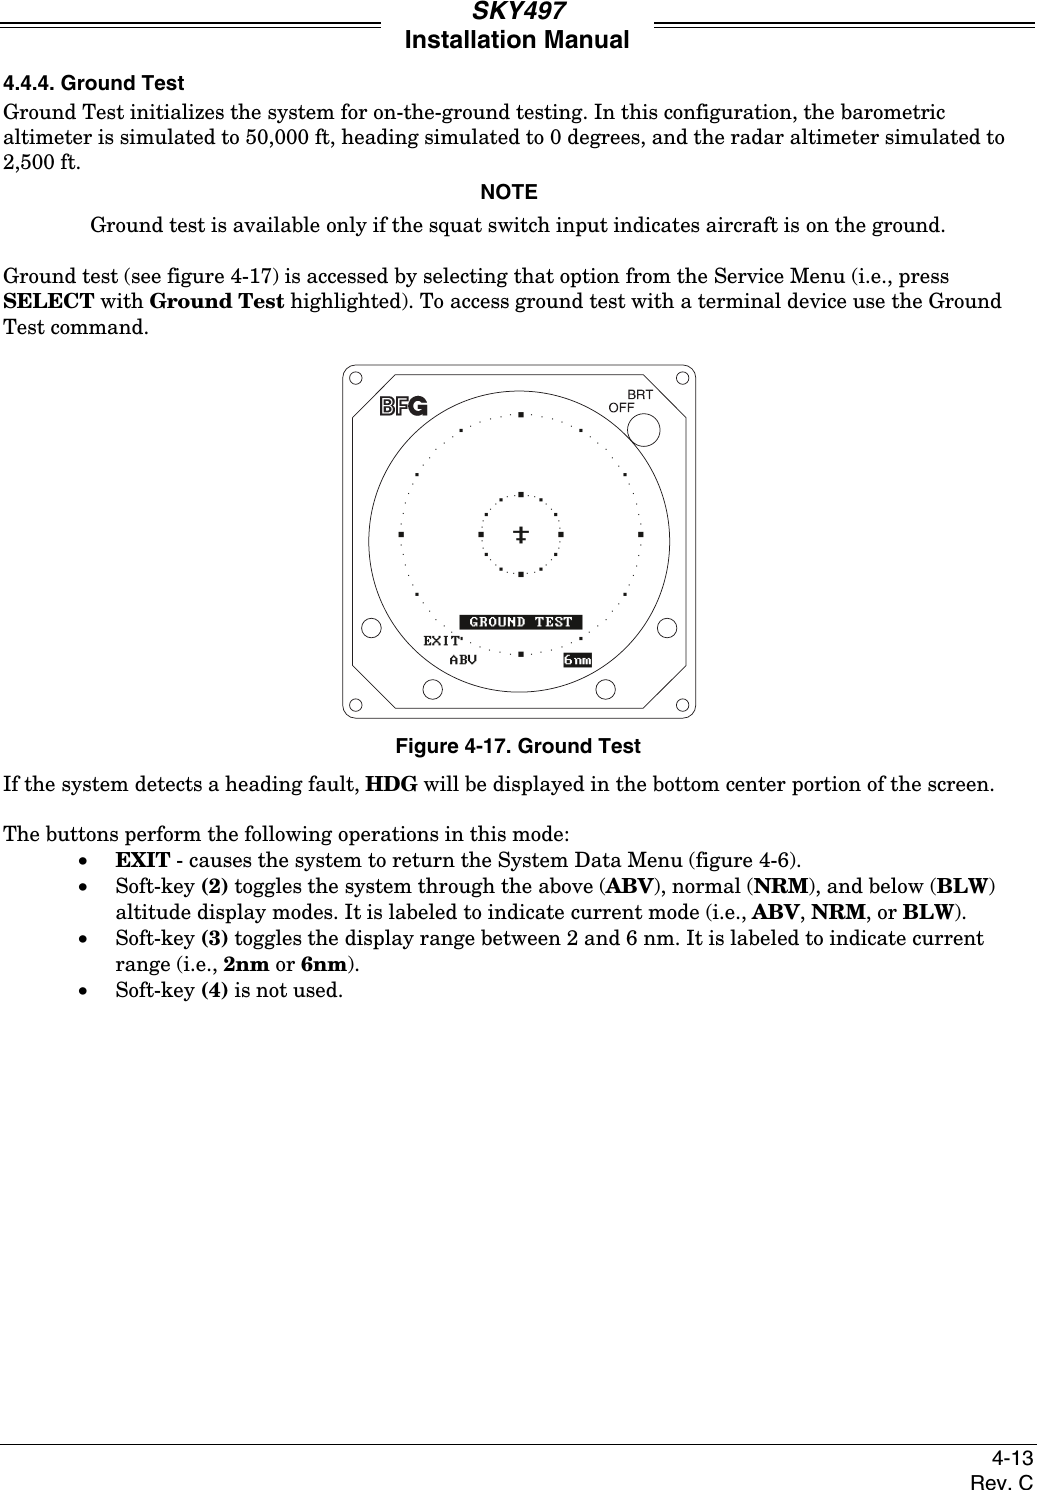 SKY497Installation Manual4-13Rev. C4.4.4. Ground TestGround Test initializes the system for on-the-ground testing. In this configuration, the barometricaltimeter is simulated to 50,000 ft, heading simulated to 0 degrees, and the radar altimeter simulated to2,500 ft.NOTEGround test is available only if the squat switch input indicates aircraft is on the ground.Ground test (see figure 4-17) is accessed by selecting that option from the Service Menu (i.e., pressSELECT with Ground Test highlighted). To access ground test with a terminal device use the GroundTest command.Figure 4-17. Ground TestIf the system detects a heading fault, HDG will be displayed in the bottom center portion of the screen.The buttons perform the following operations in this mode:• EXIT - causes the system to return the System Data Menu (figure 4-6).• Soft-key (2) toggles the system through the above (ABV), normal (NRM), and below (BLW)altitude display modes. It is labeled to indicate current mode (i.e., ABV, NRM, or BLW).• Soft-key (3) toggles the display range between 2 and 6 nm. It is labeled to indicate currentrange (i.e., 2nm or 6nm).• Soft-key (4) is not used.